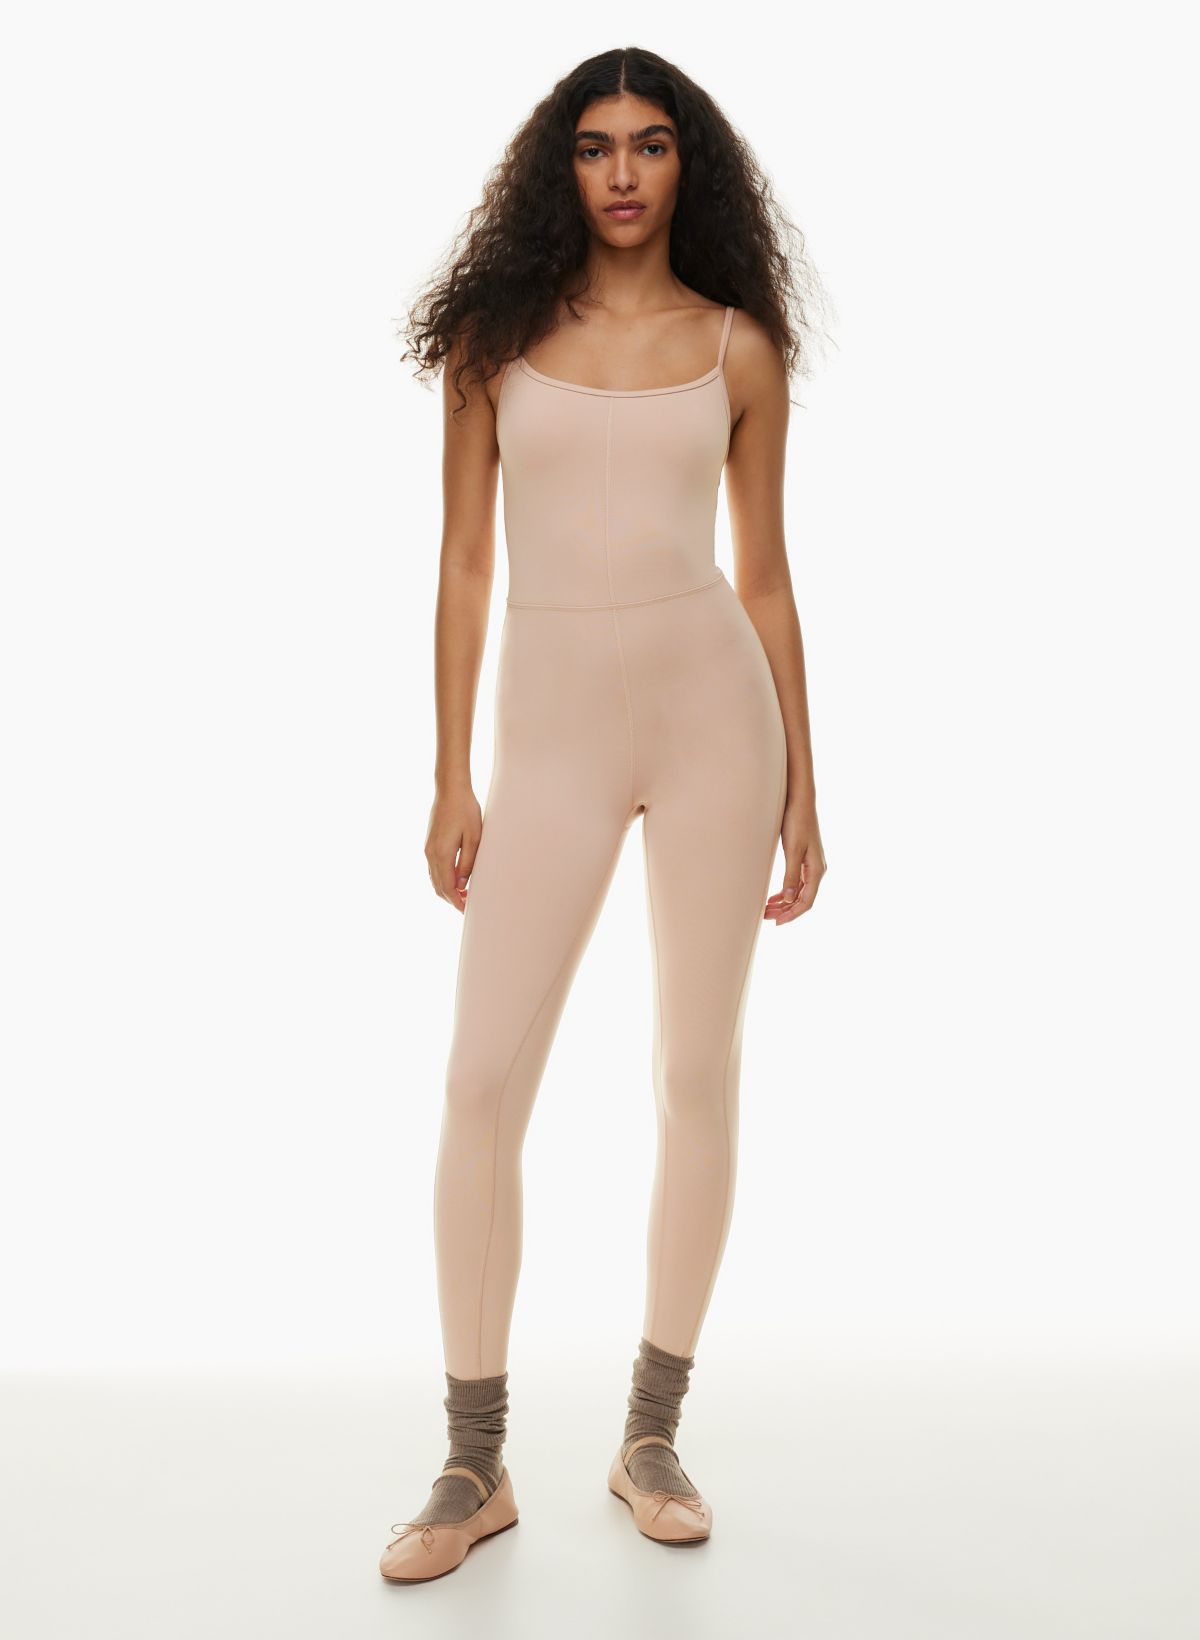 wilfred free divinity jumpsuit - Lemon8 Search